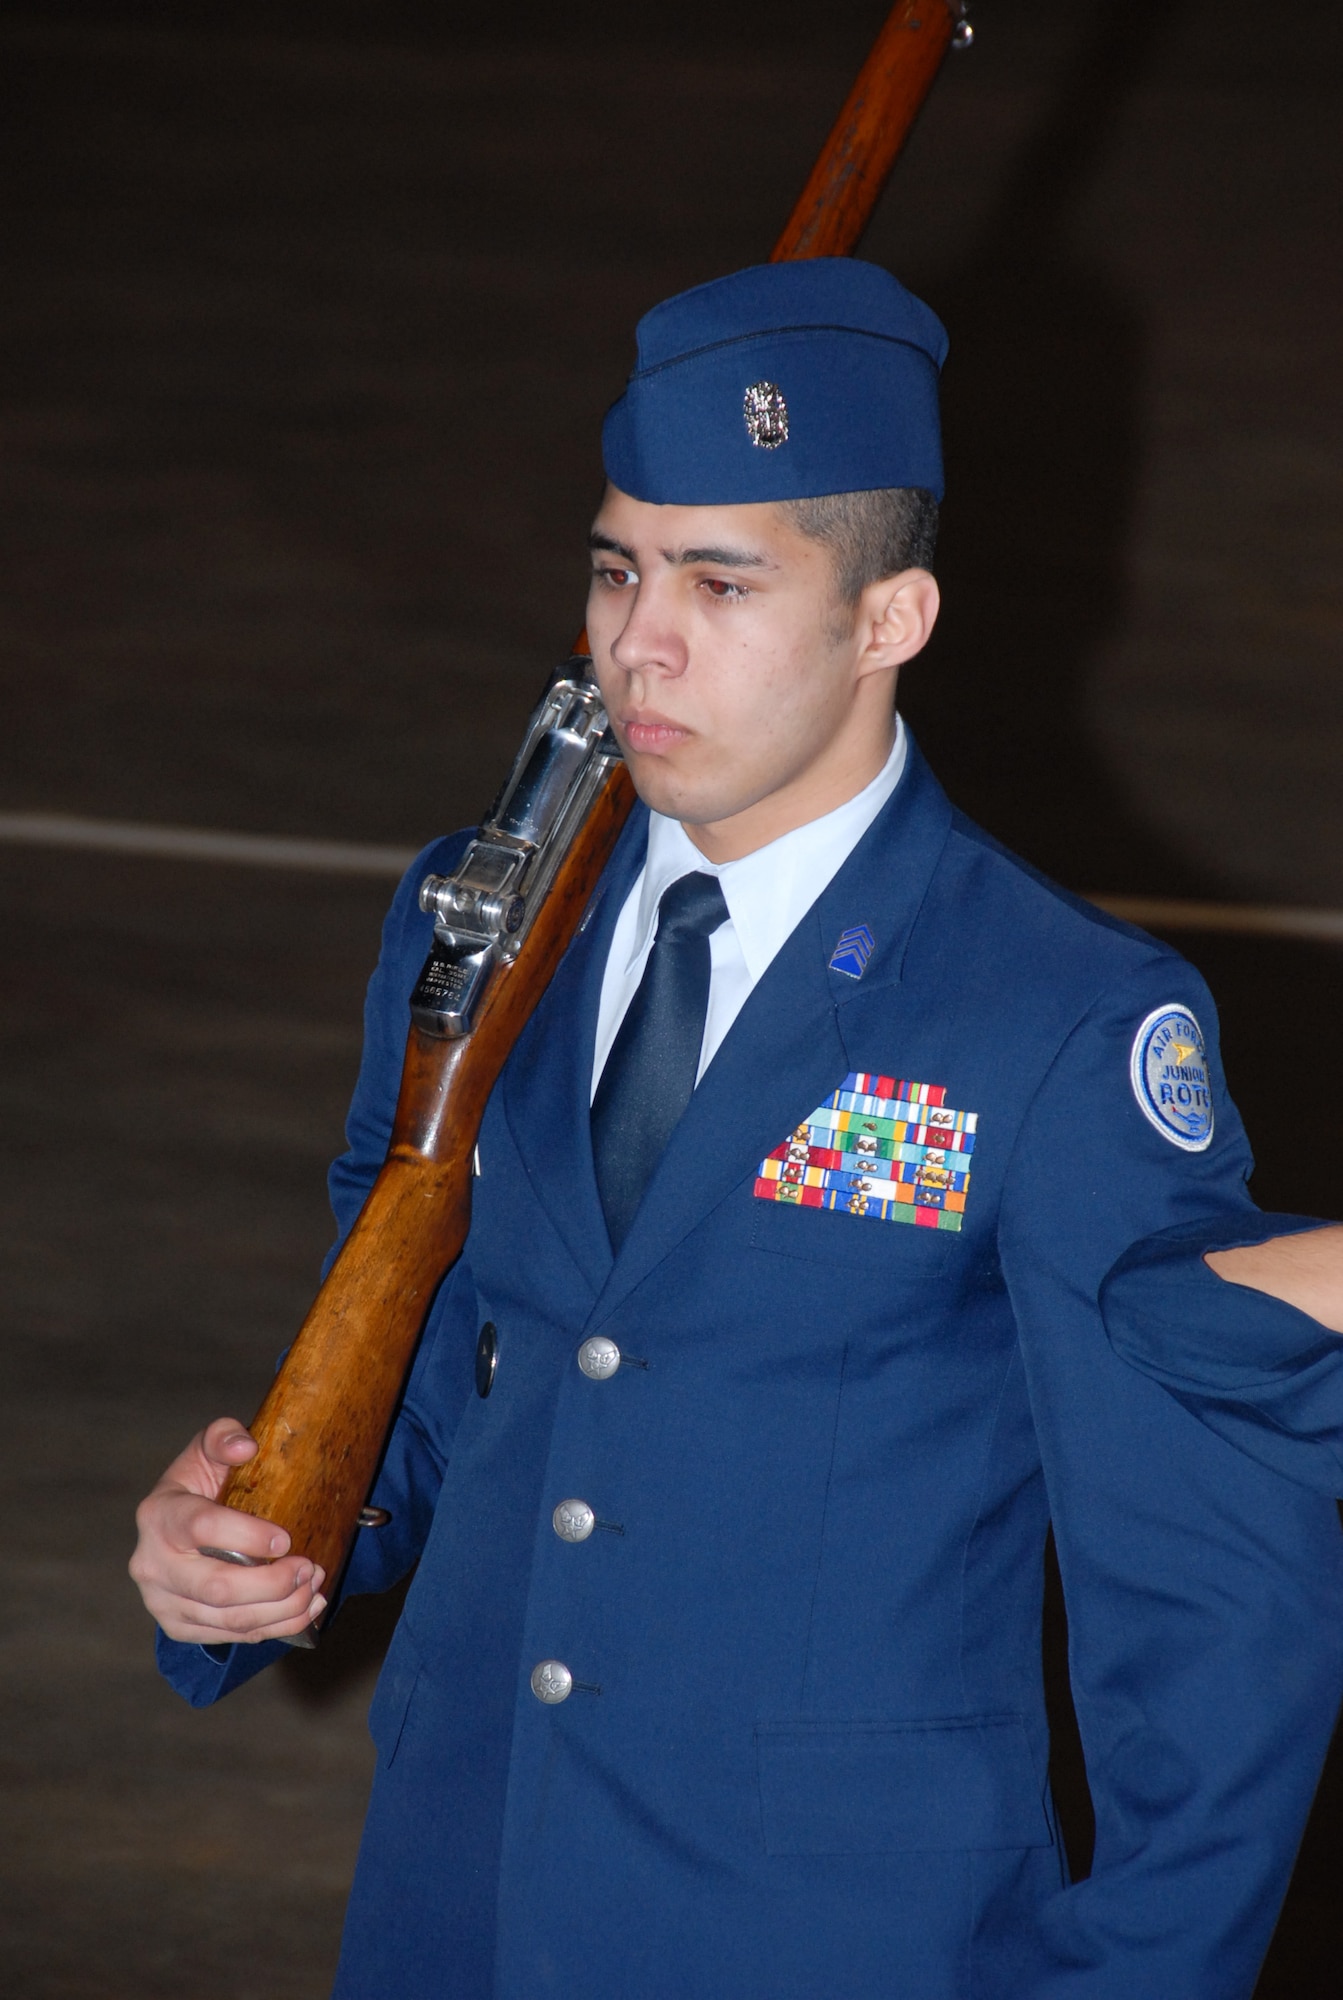 Cadet Meteo Rodriguez of the Wheeler High School JROTC Color Guard from Marietta, Ga., concentrates as his team competes in Saturday’s national drill competition. (Air Force photo by Bud Hancock)